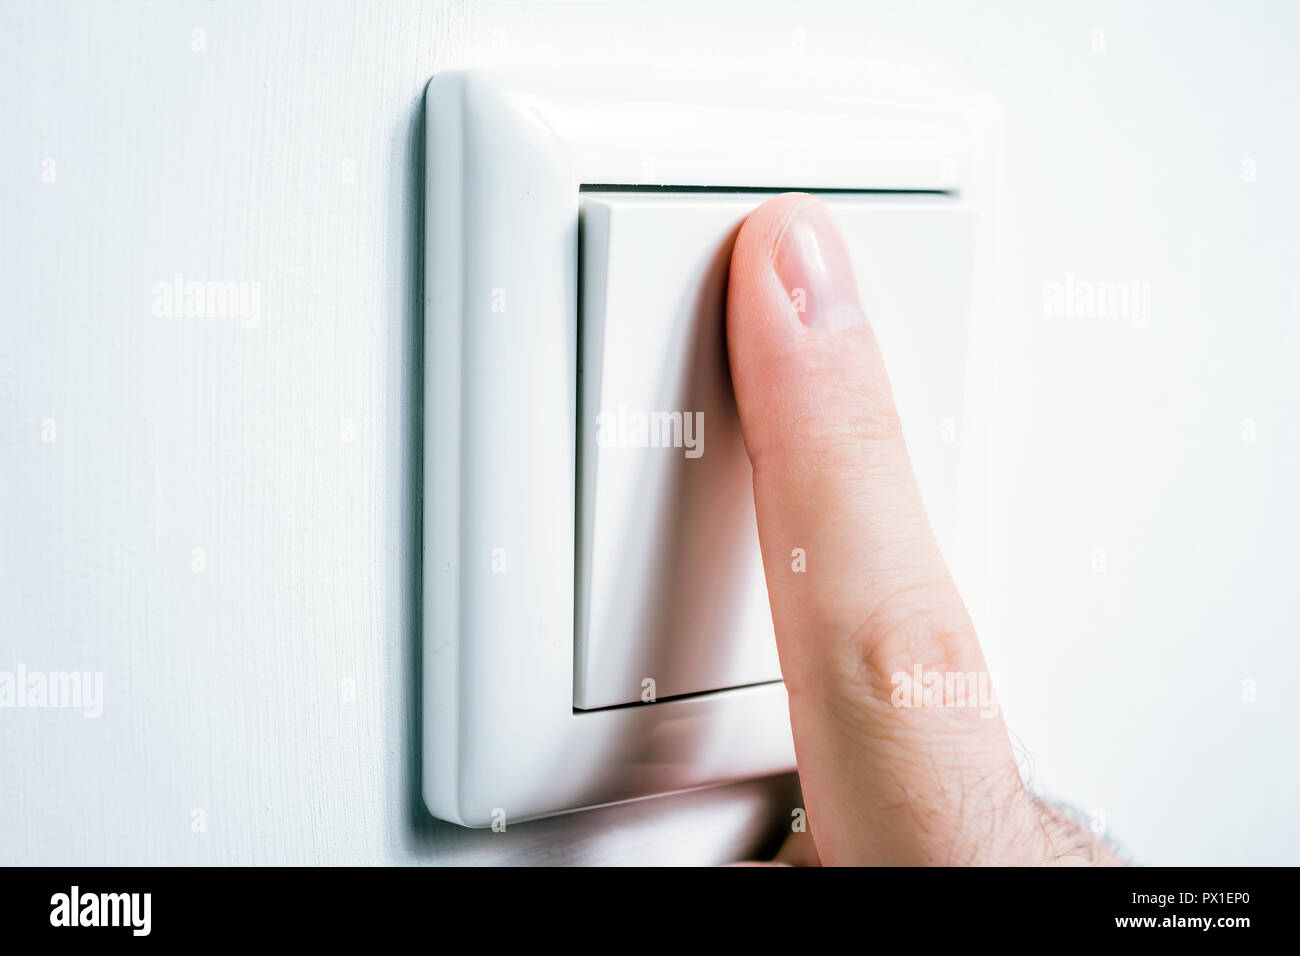 Male Finger Touching A Light Switch To Turn The Light On Or Off Stock Photo